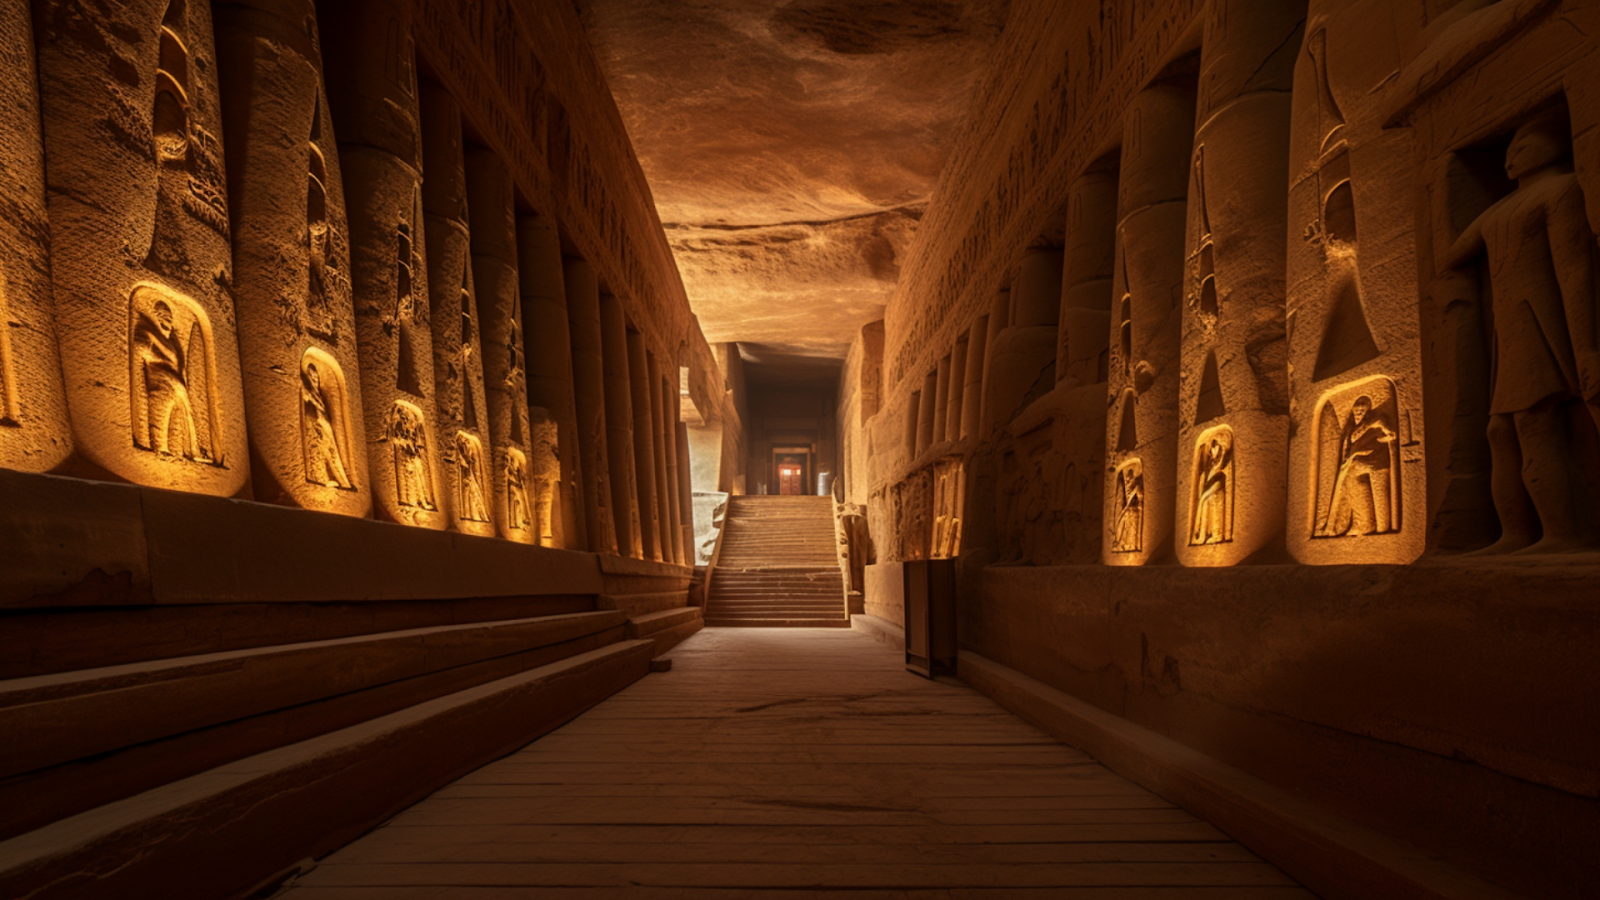 The grand interior of the Abu Simbel temples in Aswan, Egypt, a historic site that transports travelers back to the time of pharaohs.